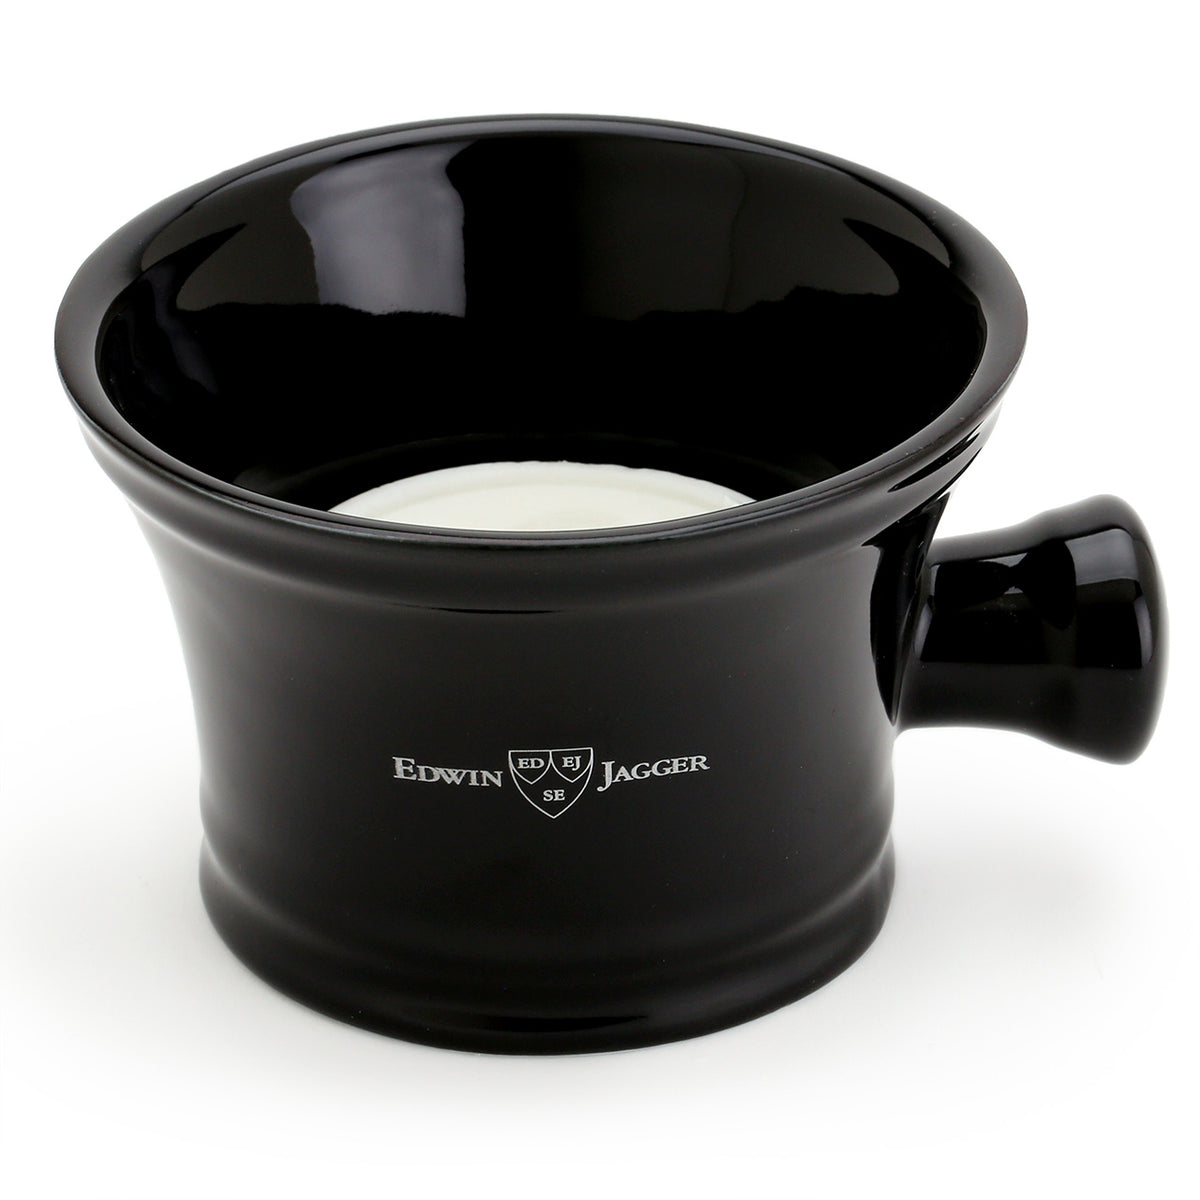 Edwin Jagger Black Apothecary-style Bowl with a puck of shave soap fitting neatly inside - soap bought separately